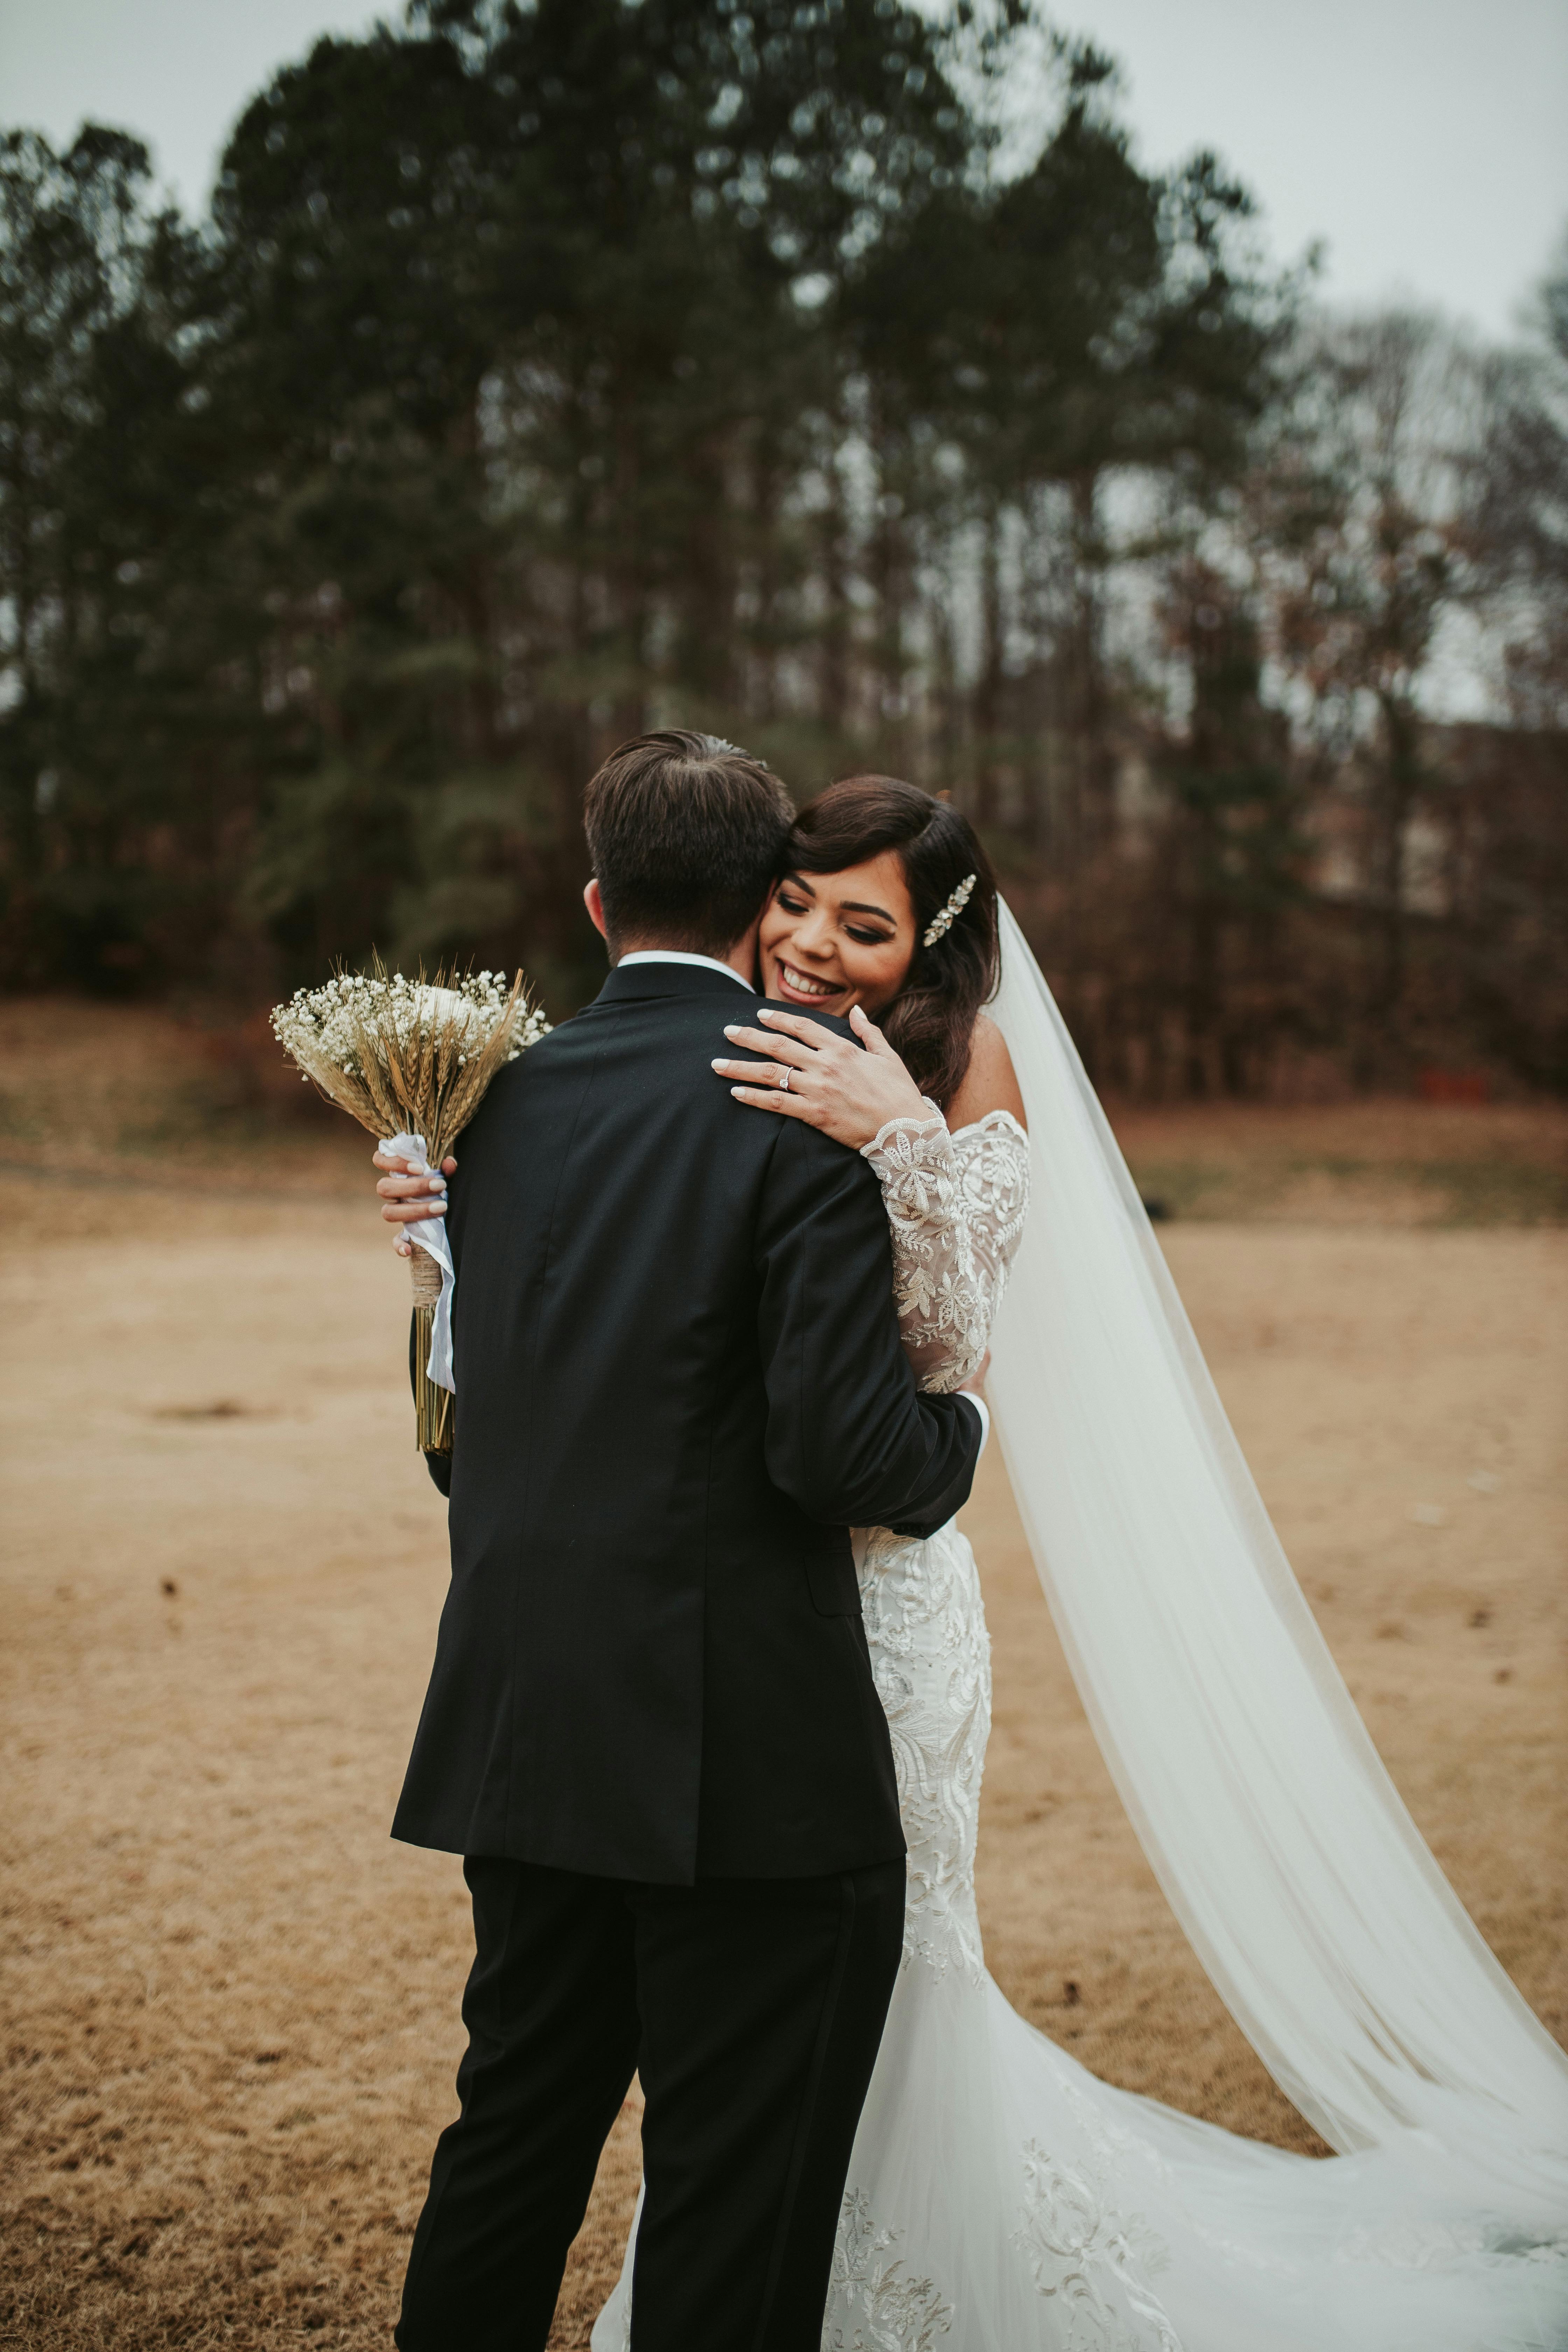 A bride hugging a man on her wedding day | Source: Pexels